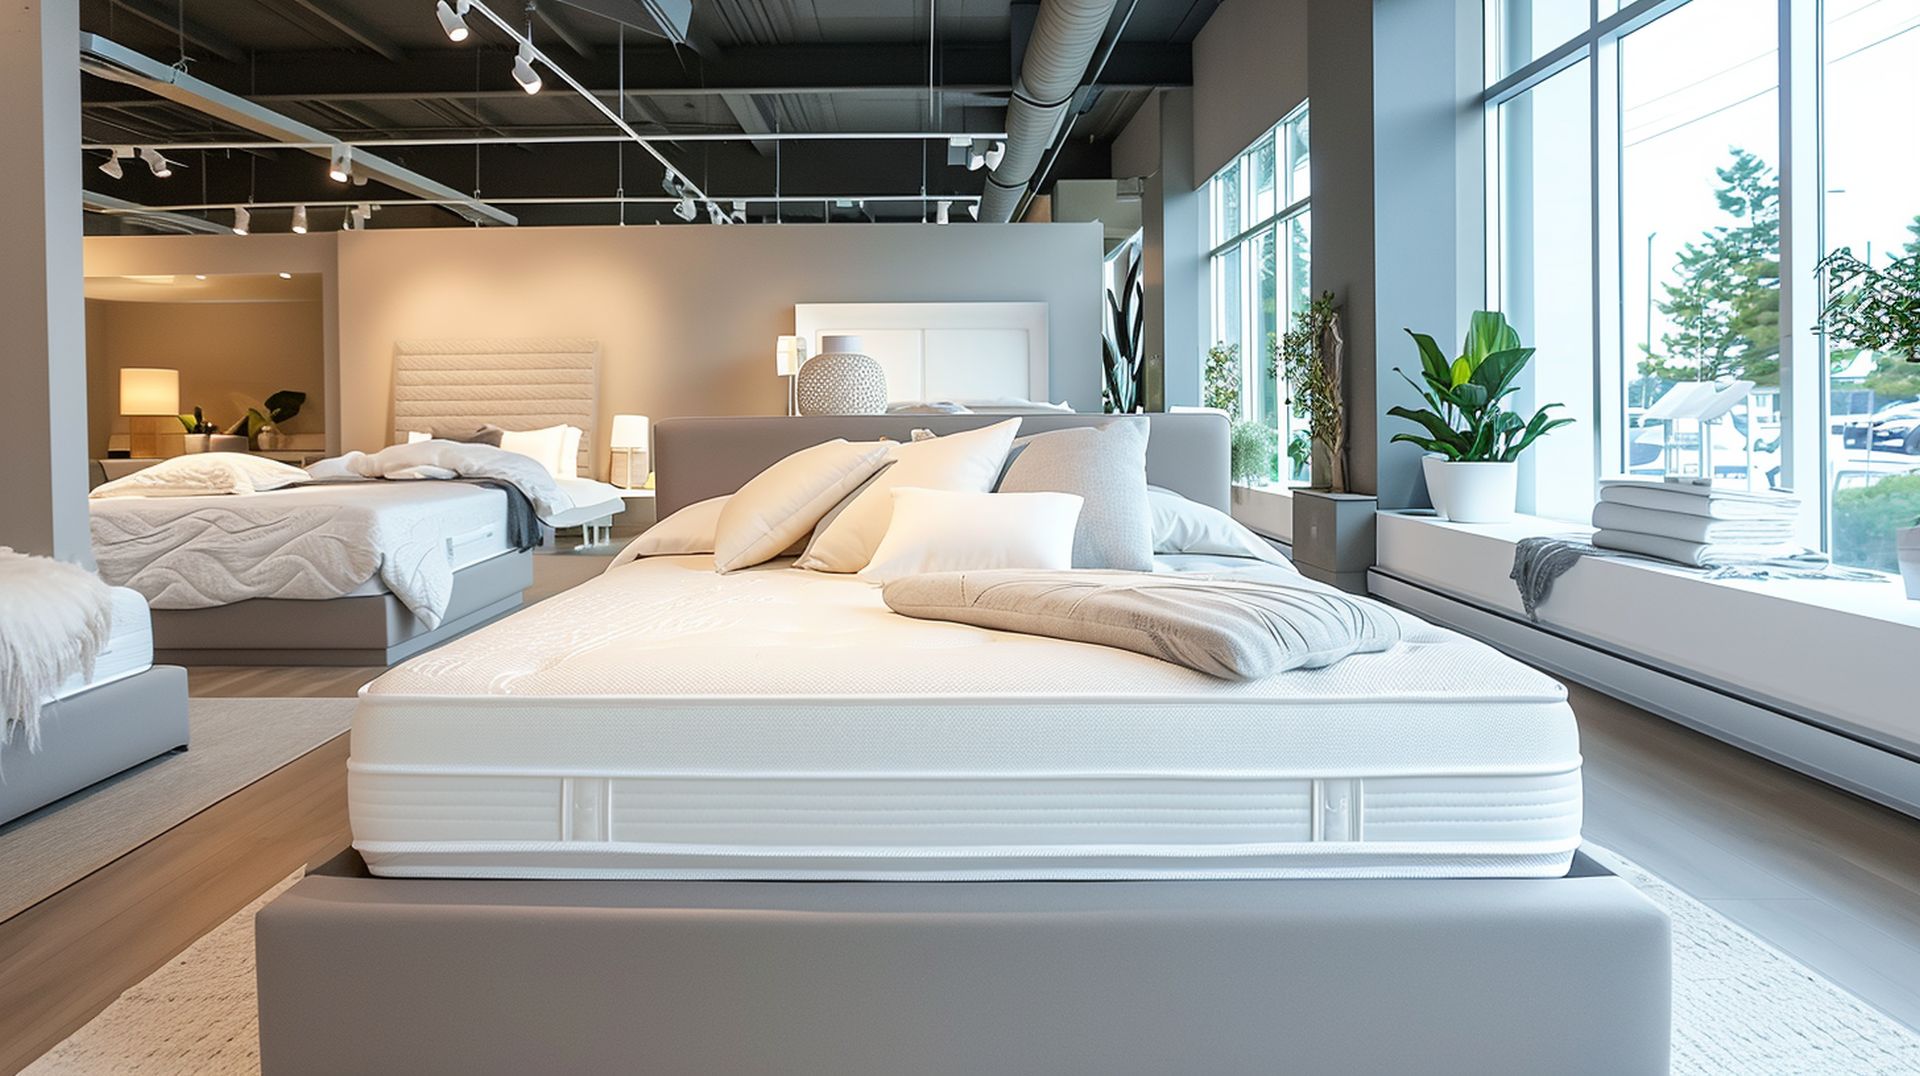 Local Casper mattress stores have the best prices, sales, and deals if you're looking for a new mattress in Casper